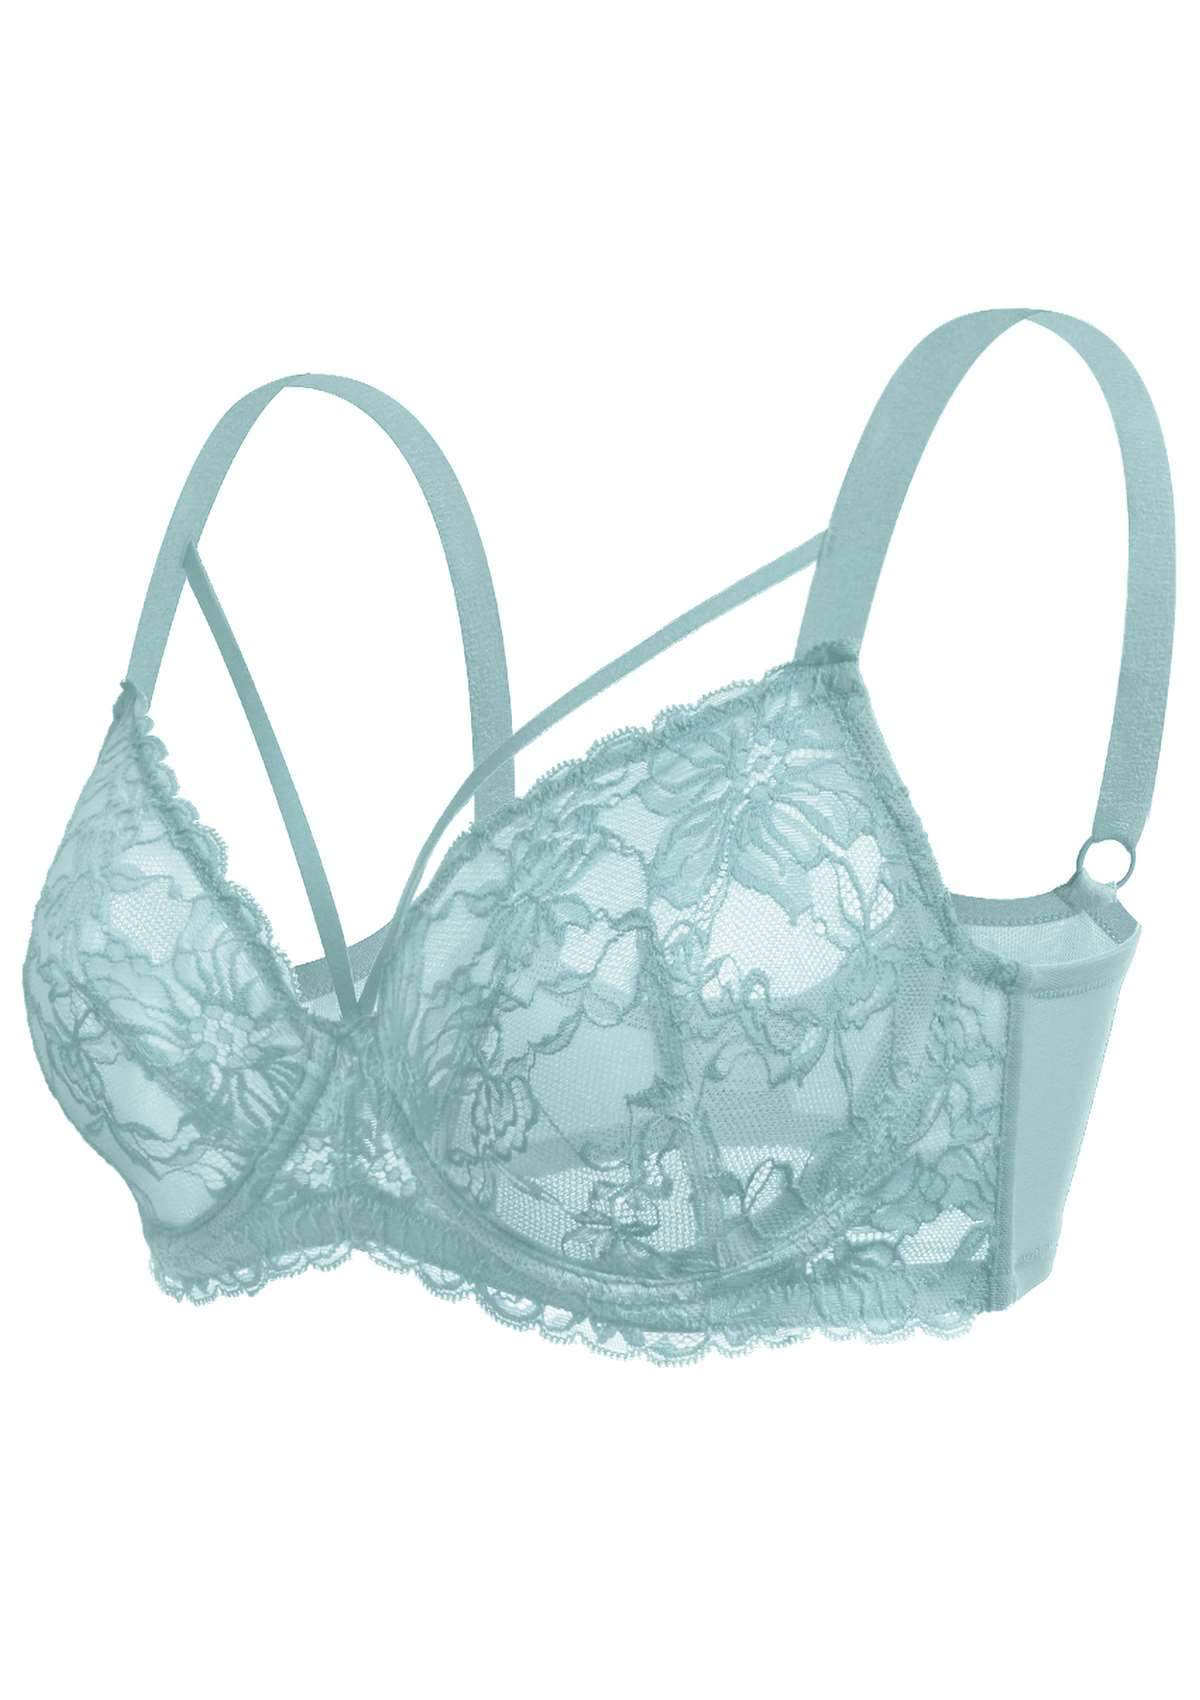 HSIA Pretty In Petals Unlined Lace Bra: Comfortable And Supportive Bra - Pewter Blue / 38 / C